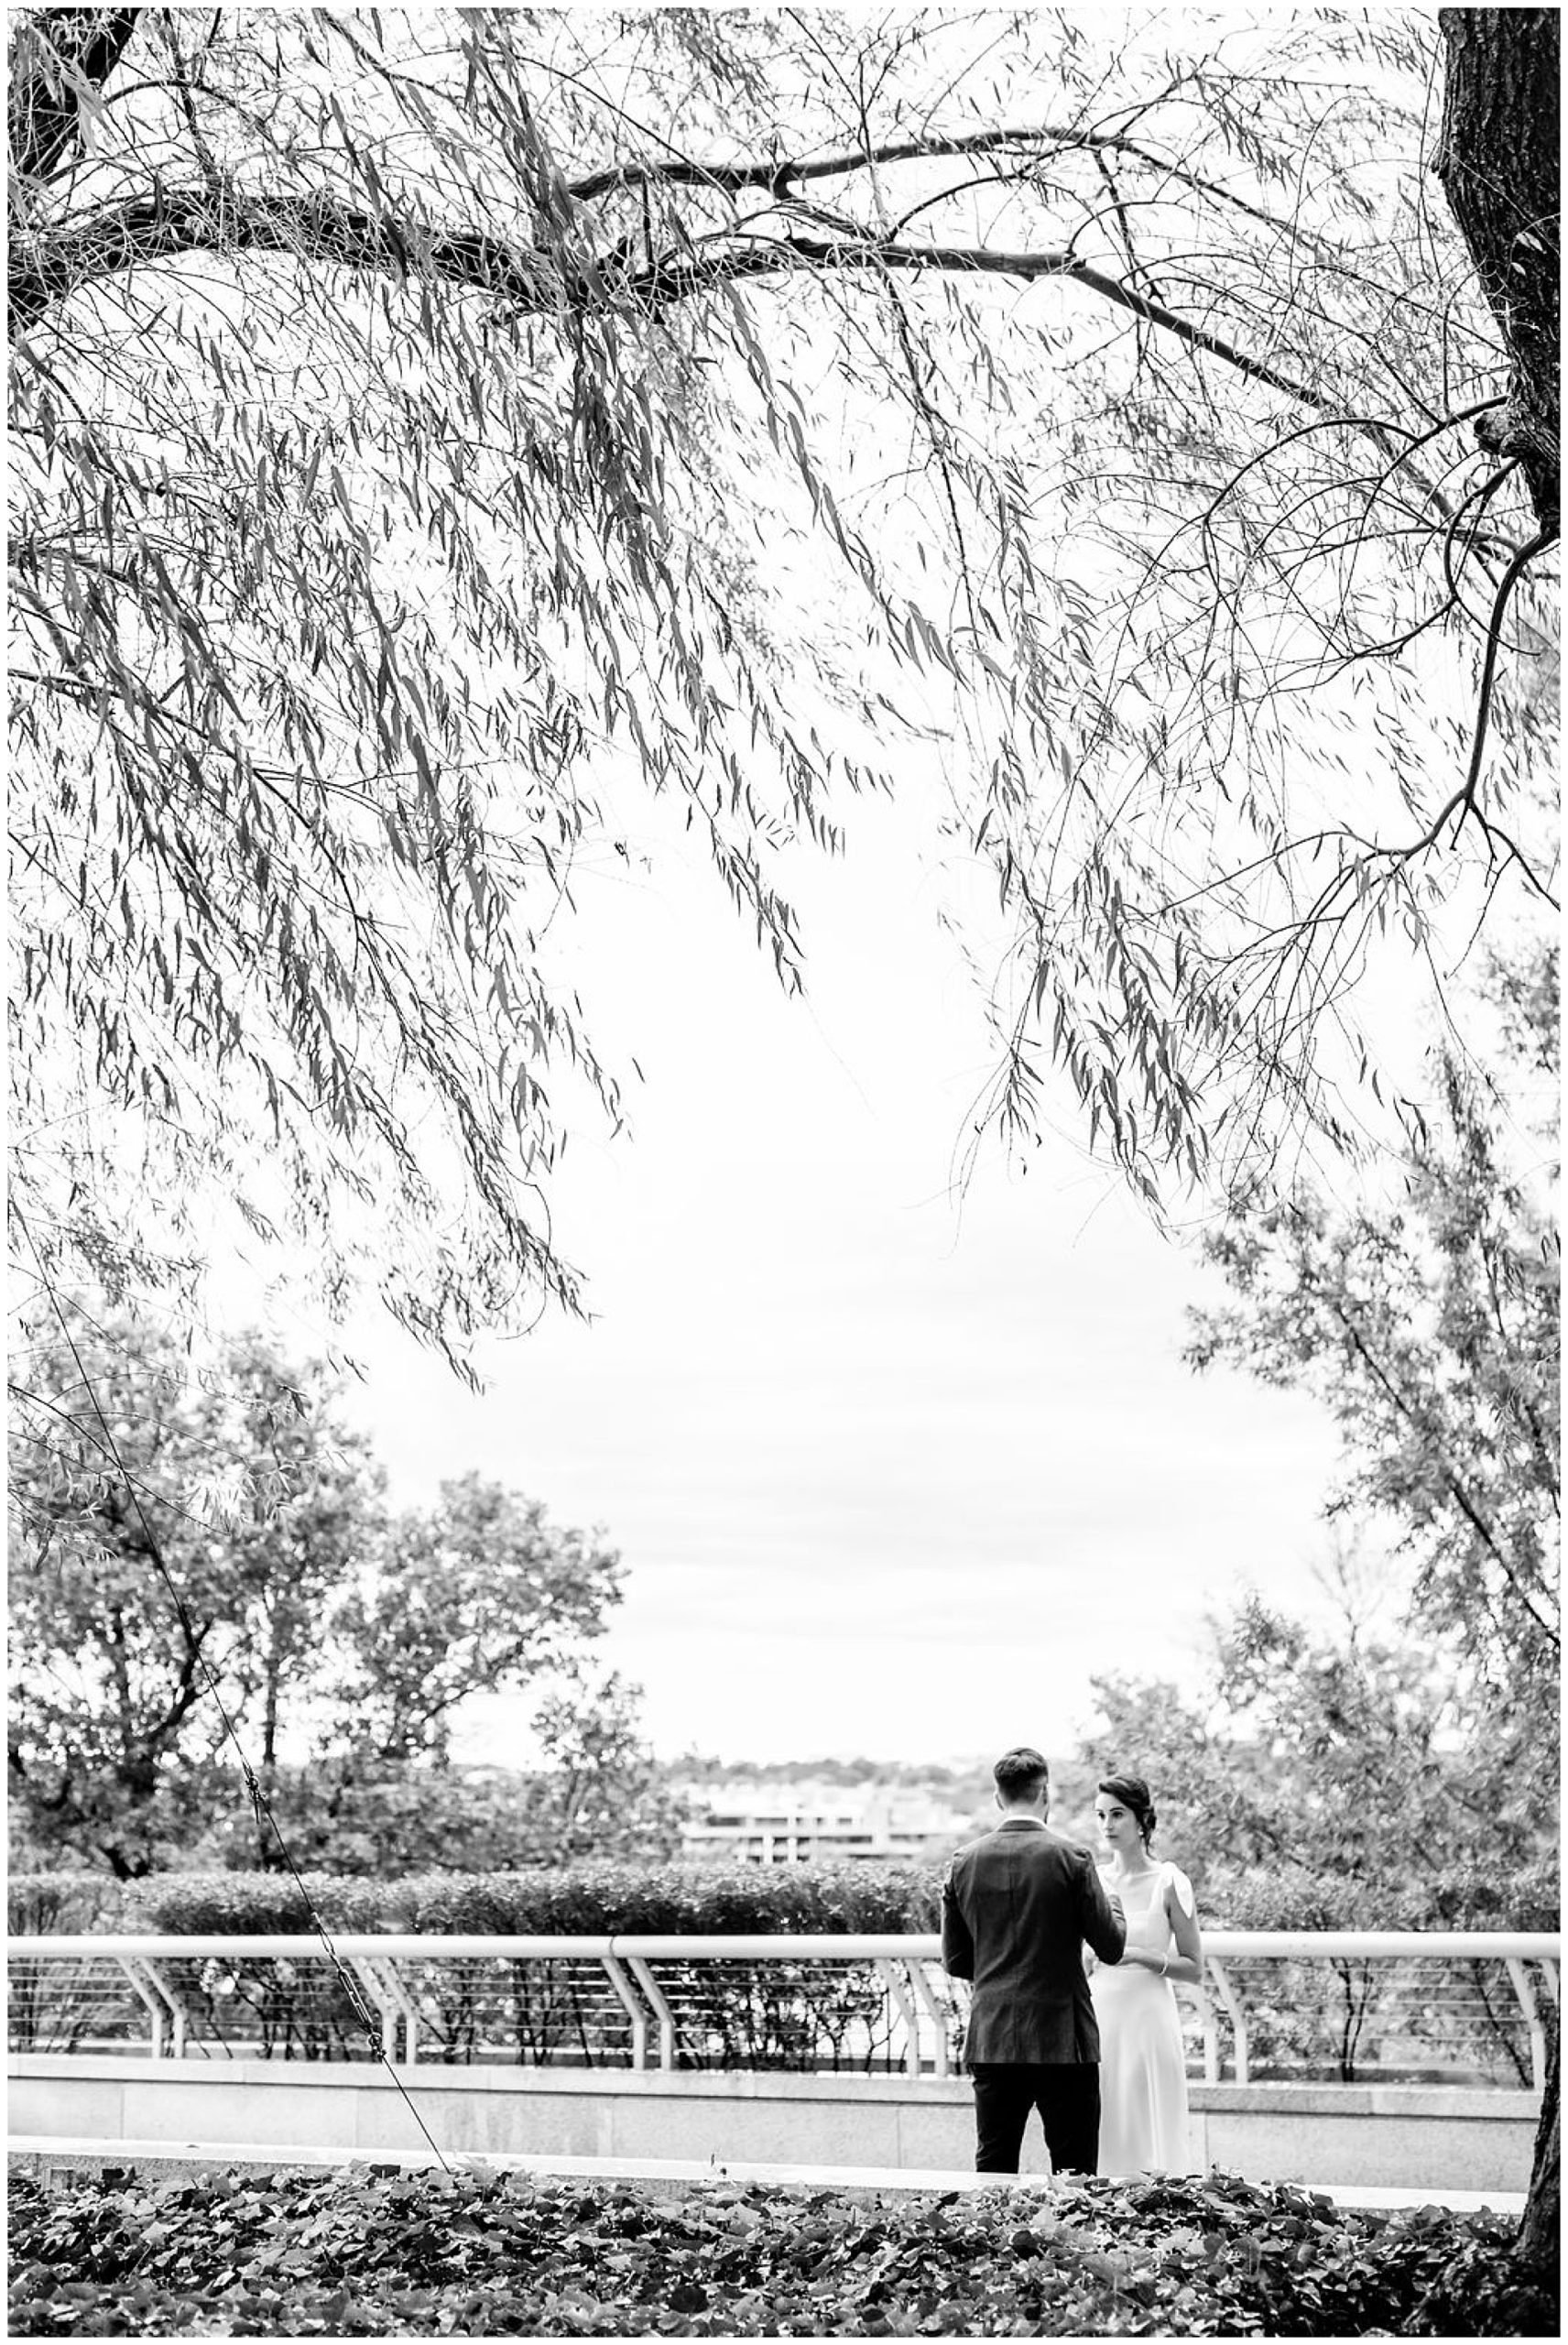 romantic Kennedy Center elopement, Washington DC elopement photographer, Kennedy Center photographer, Kennedy Center portraits, rainy elopement, natural light elopement photography, DC elopement, DC wedding photographer, Rachel E.H. Photography, romantic elopement, black and white, man and woman saying vows from behind tree